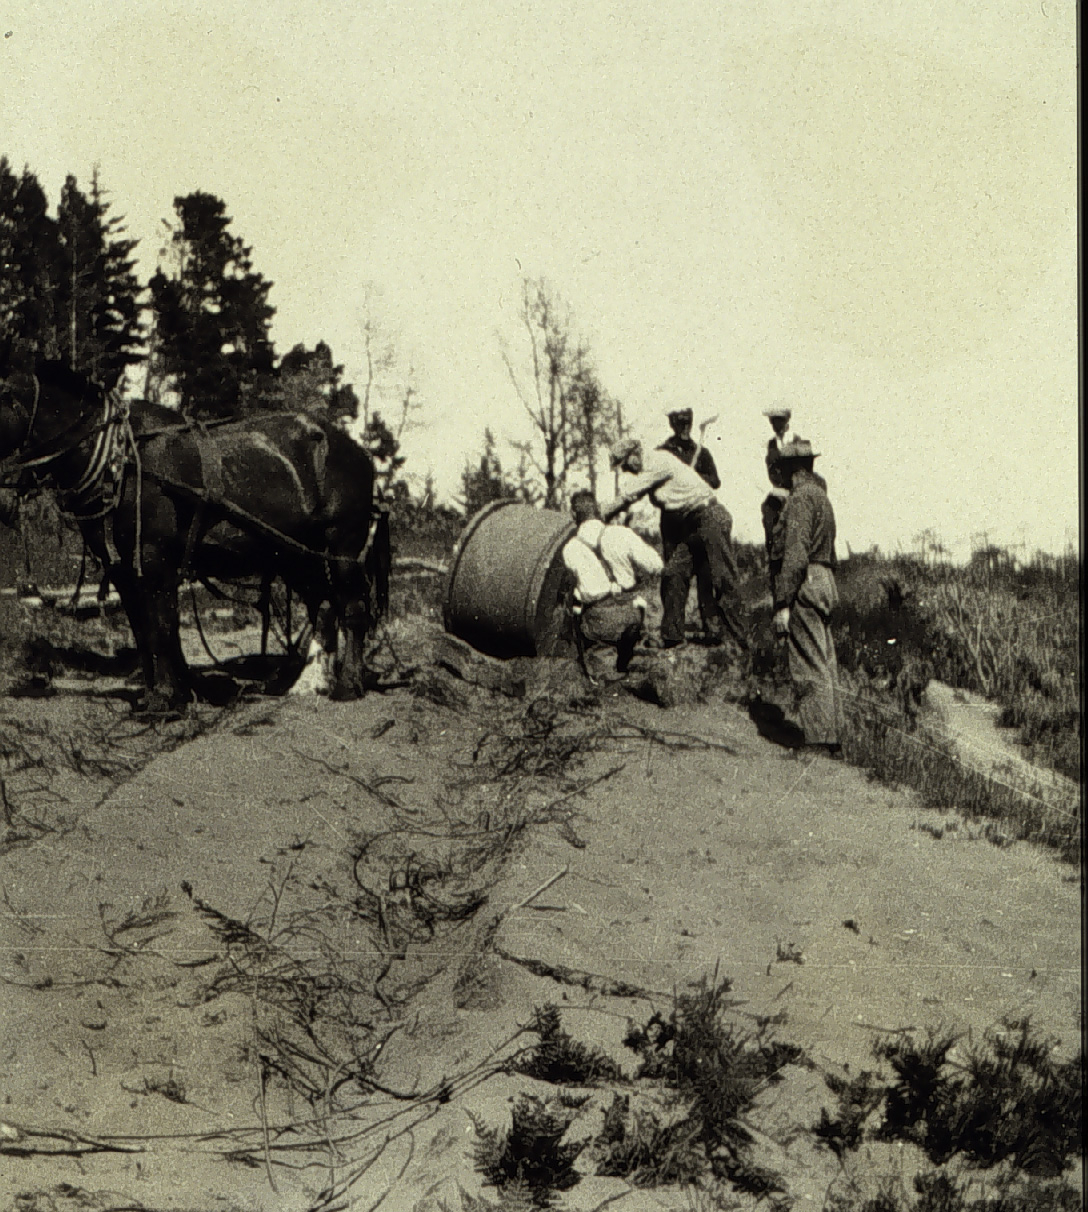 Cable drum being pulled by horses across dunes